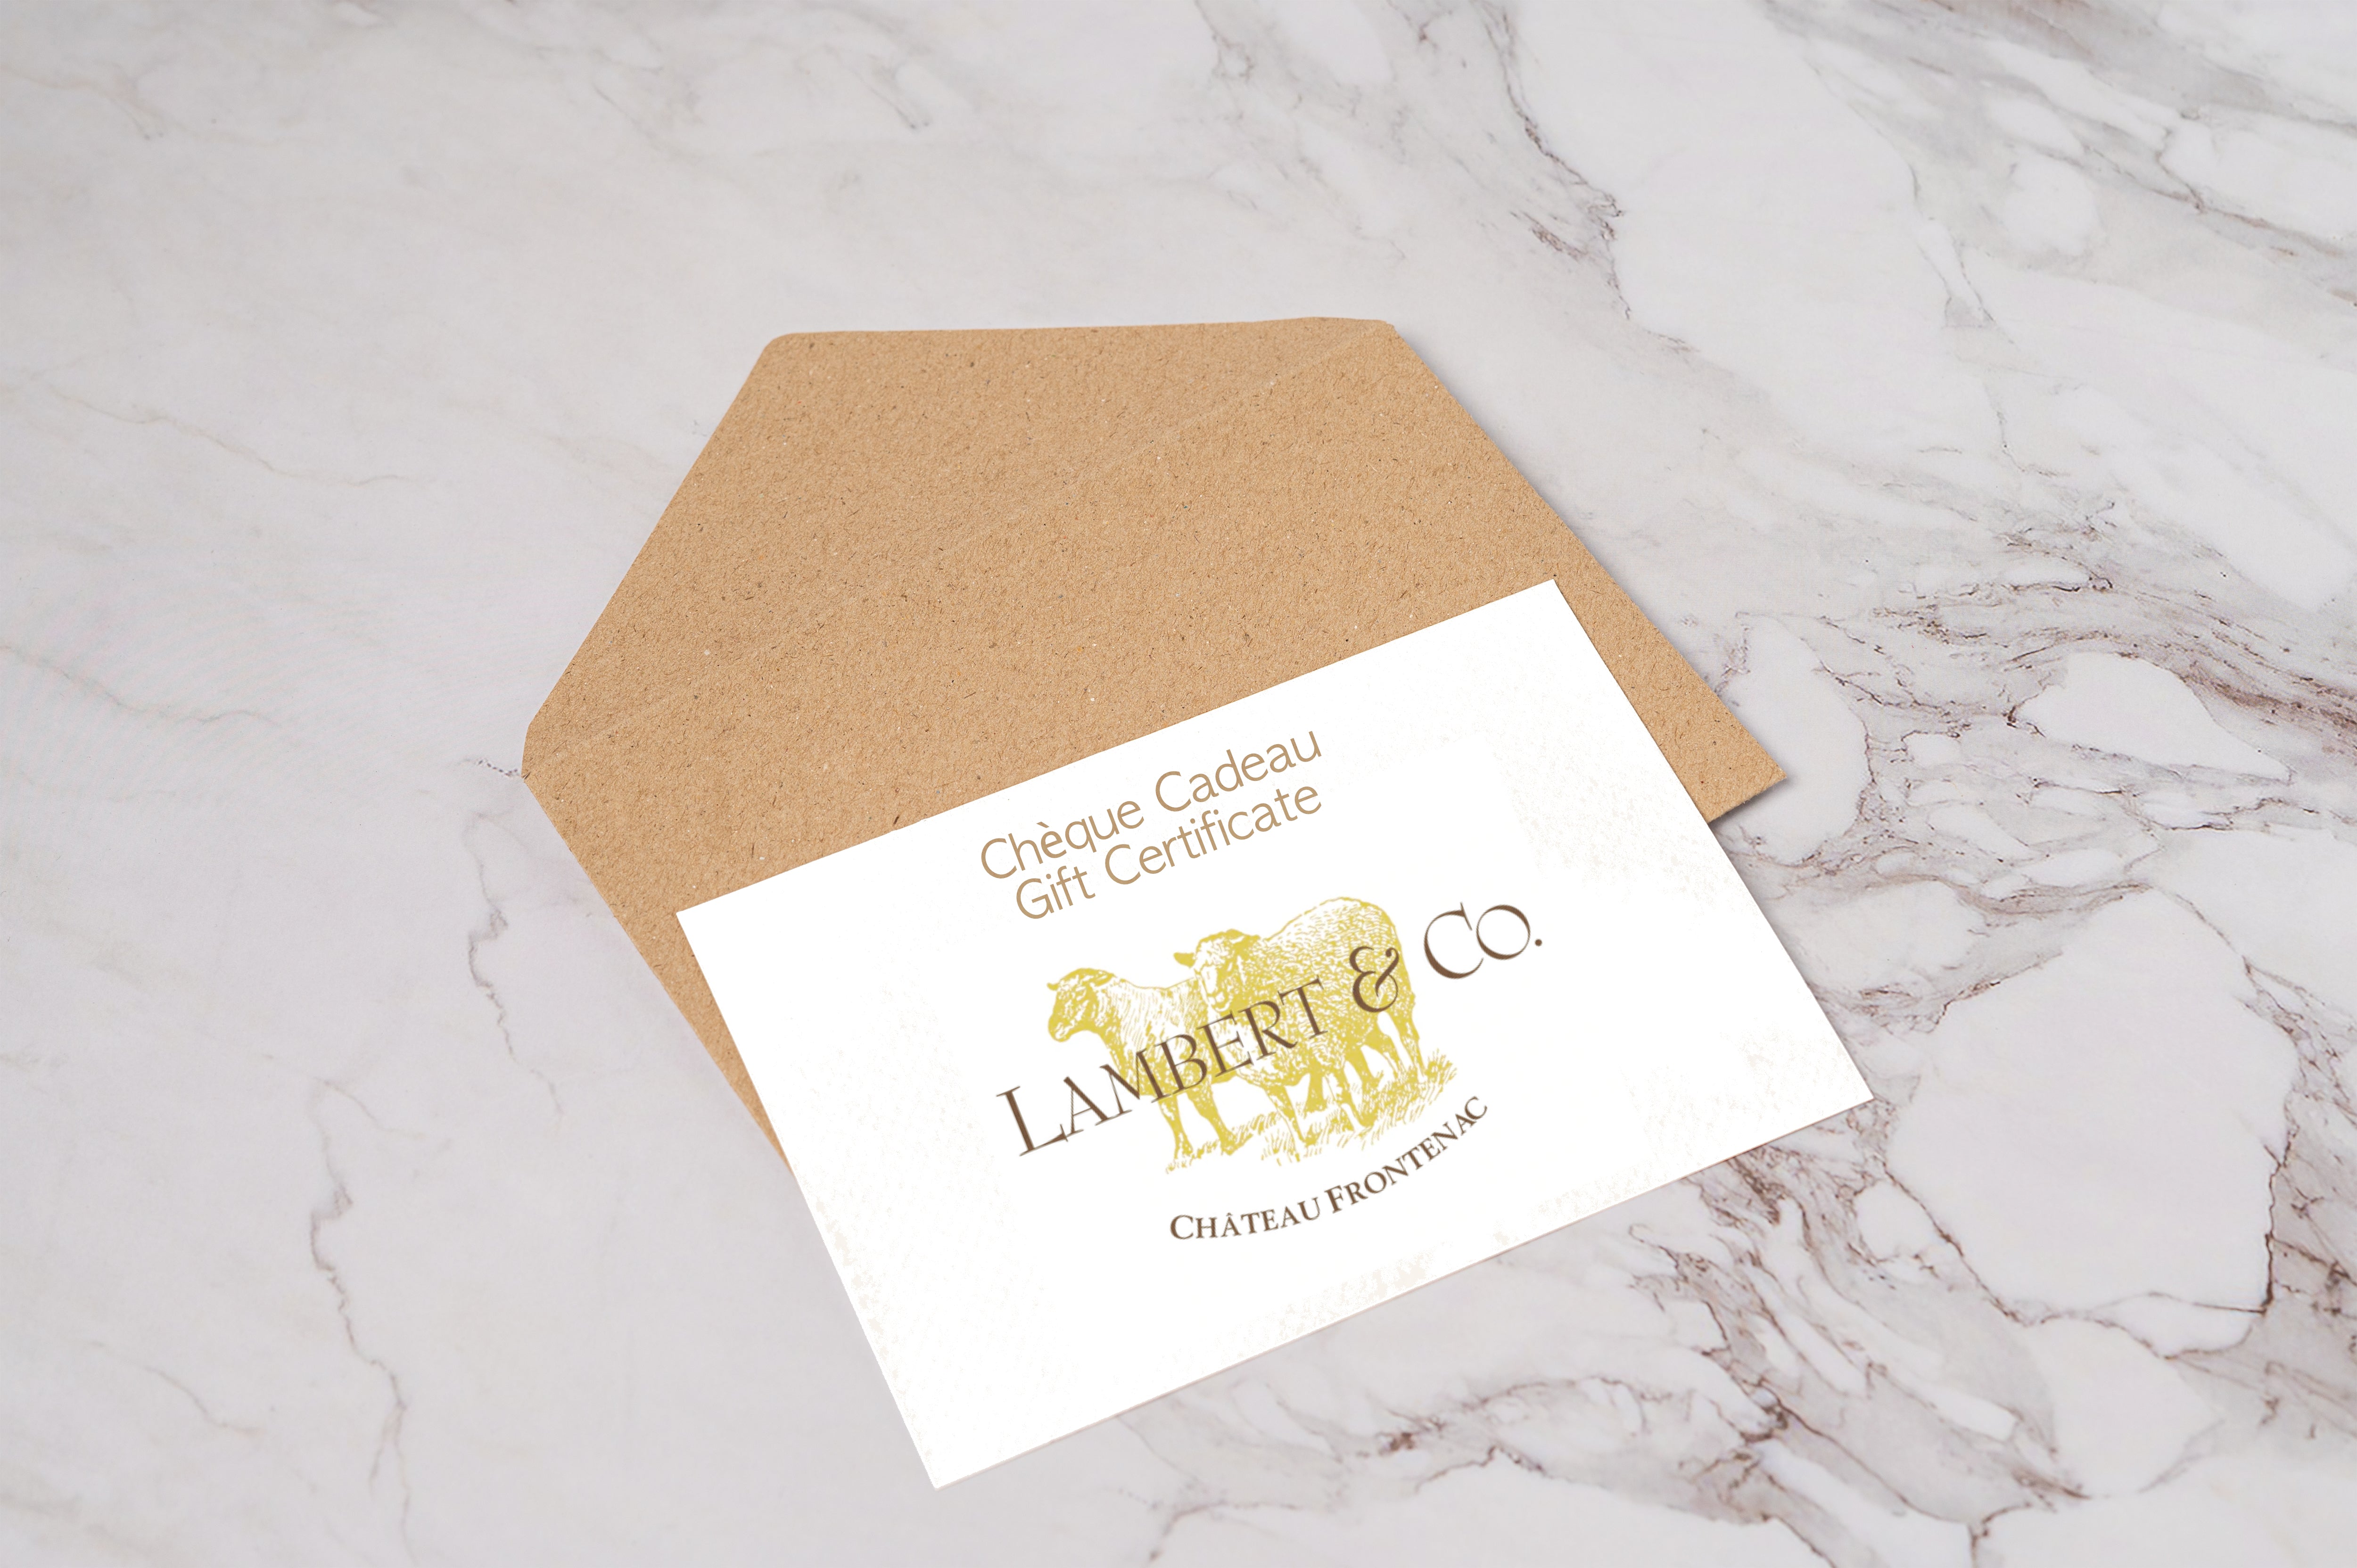 The Lambert & Co. virtual gift card...think any distance!